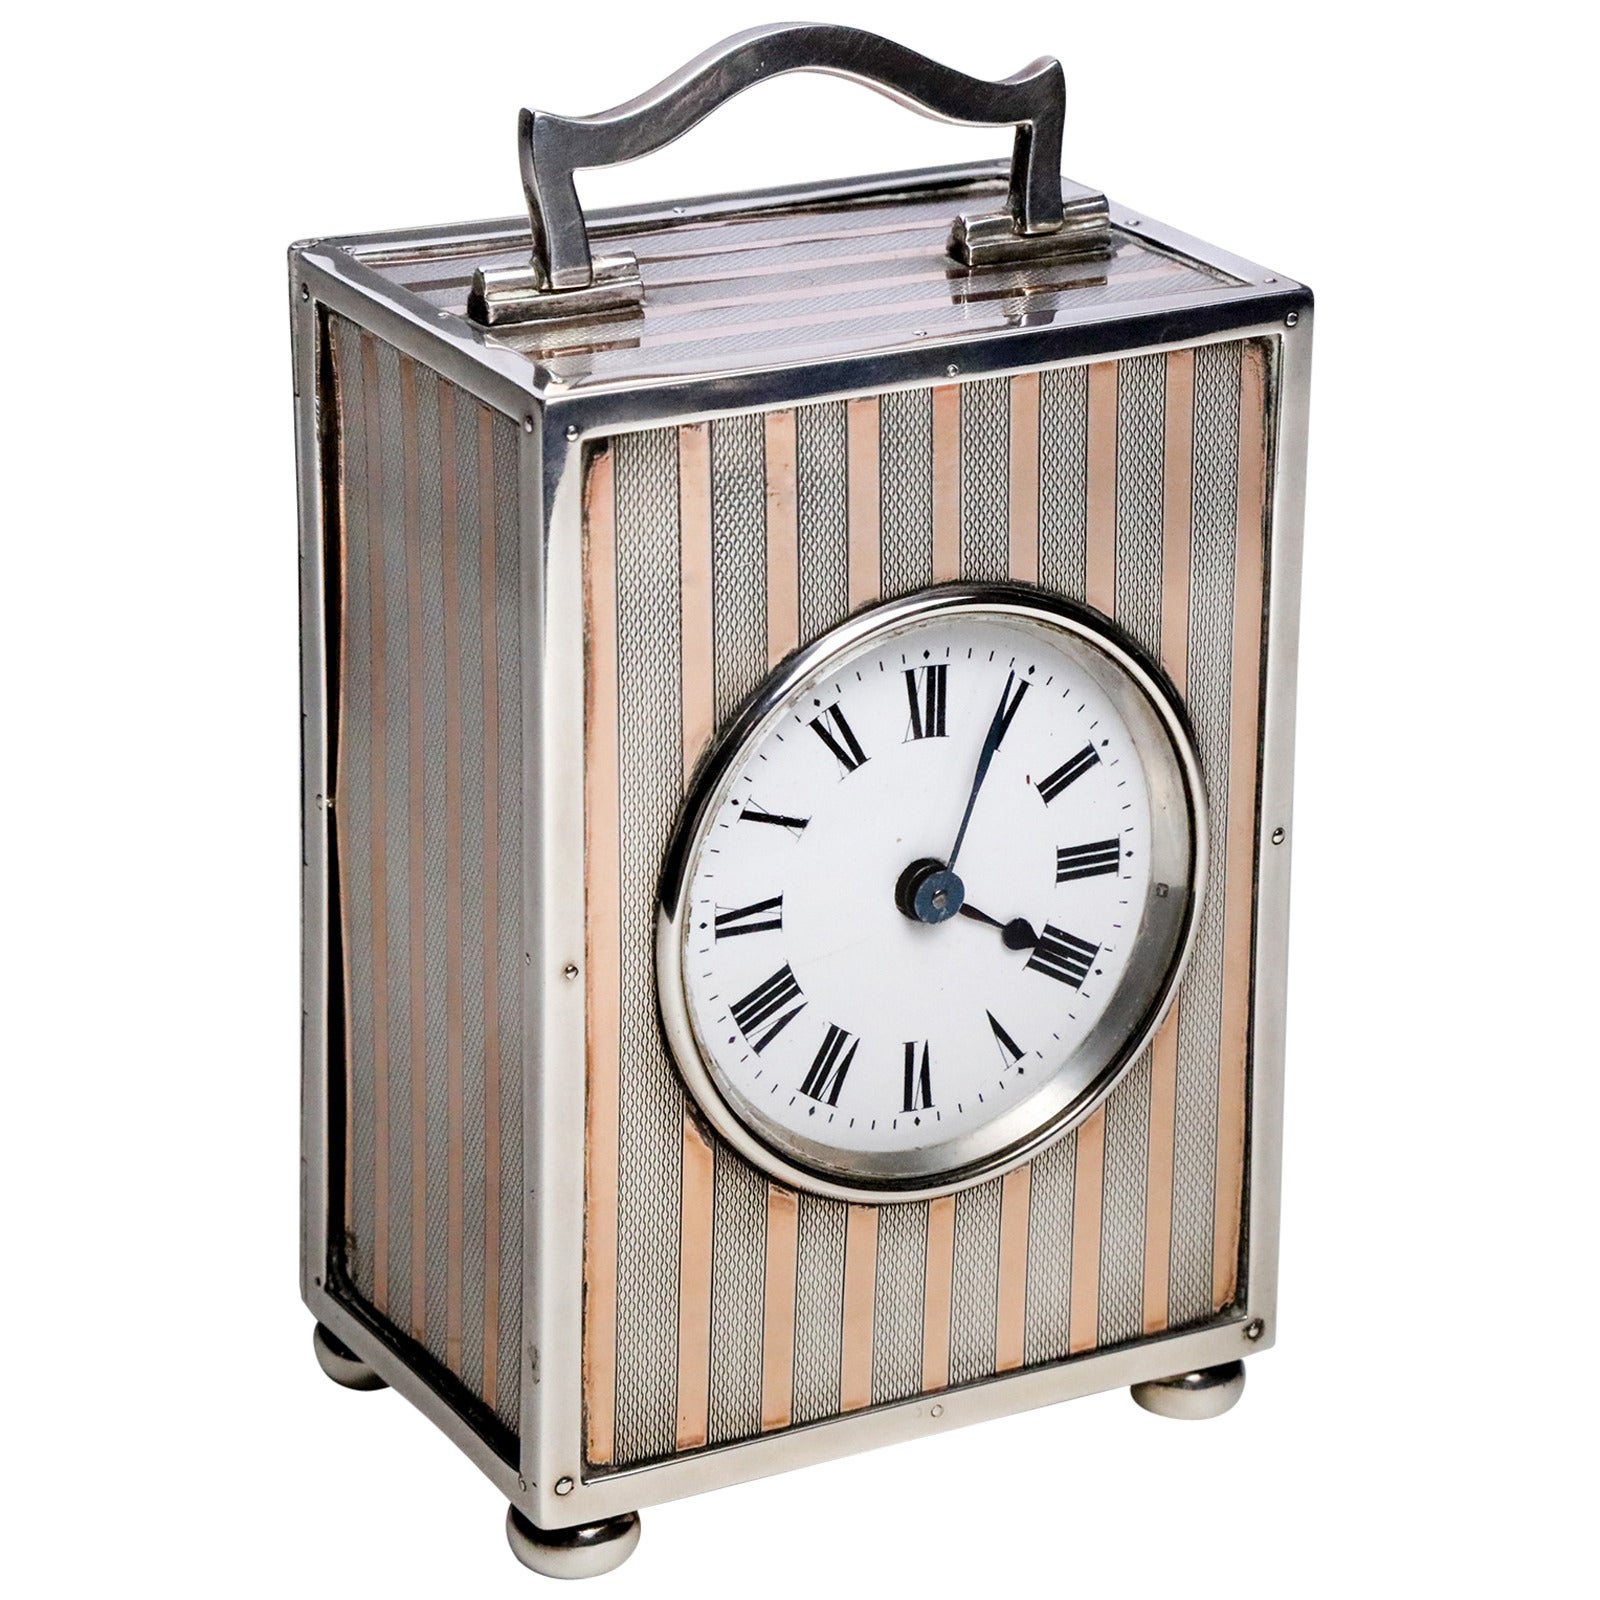 What were carriage clocks used for?